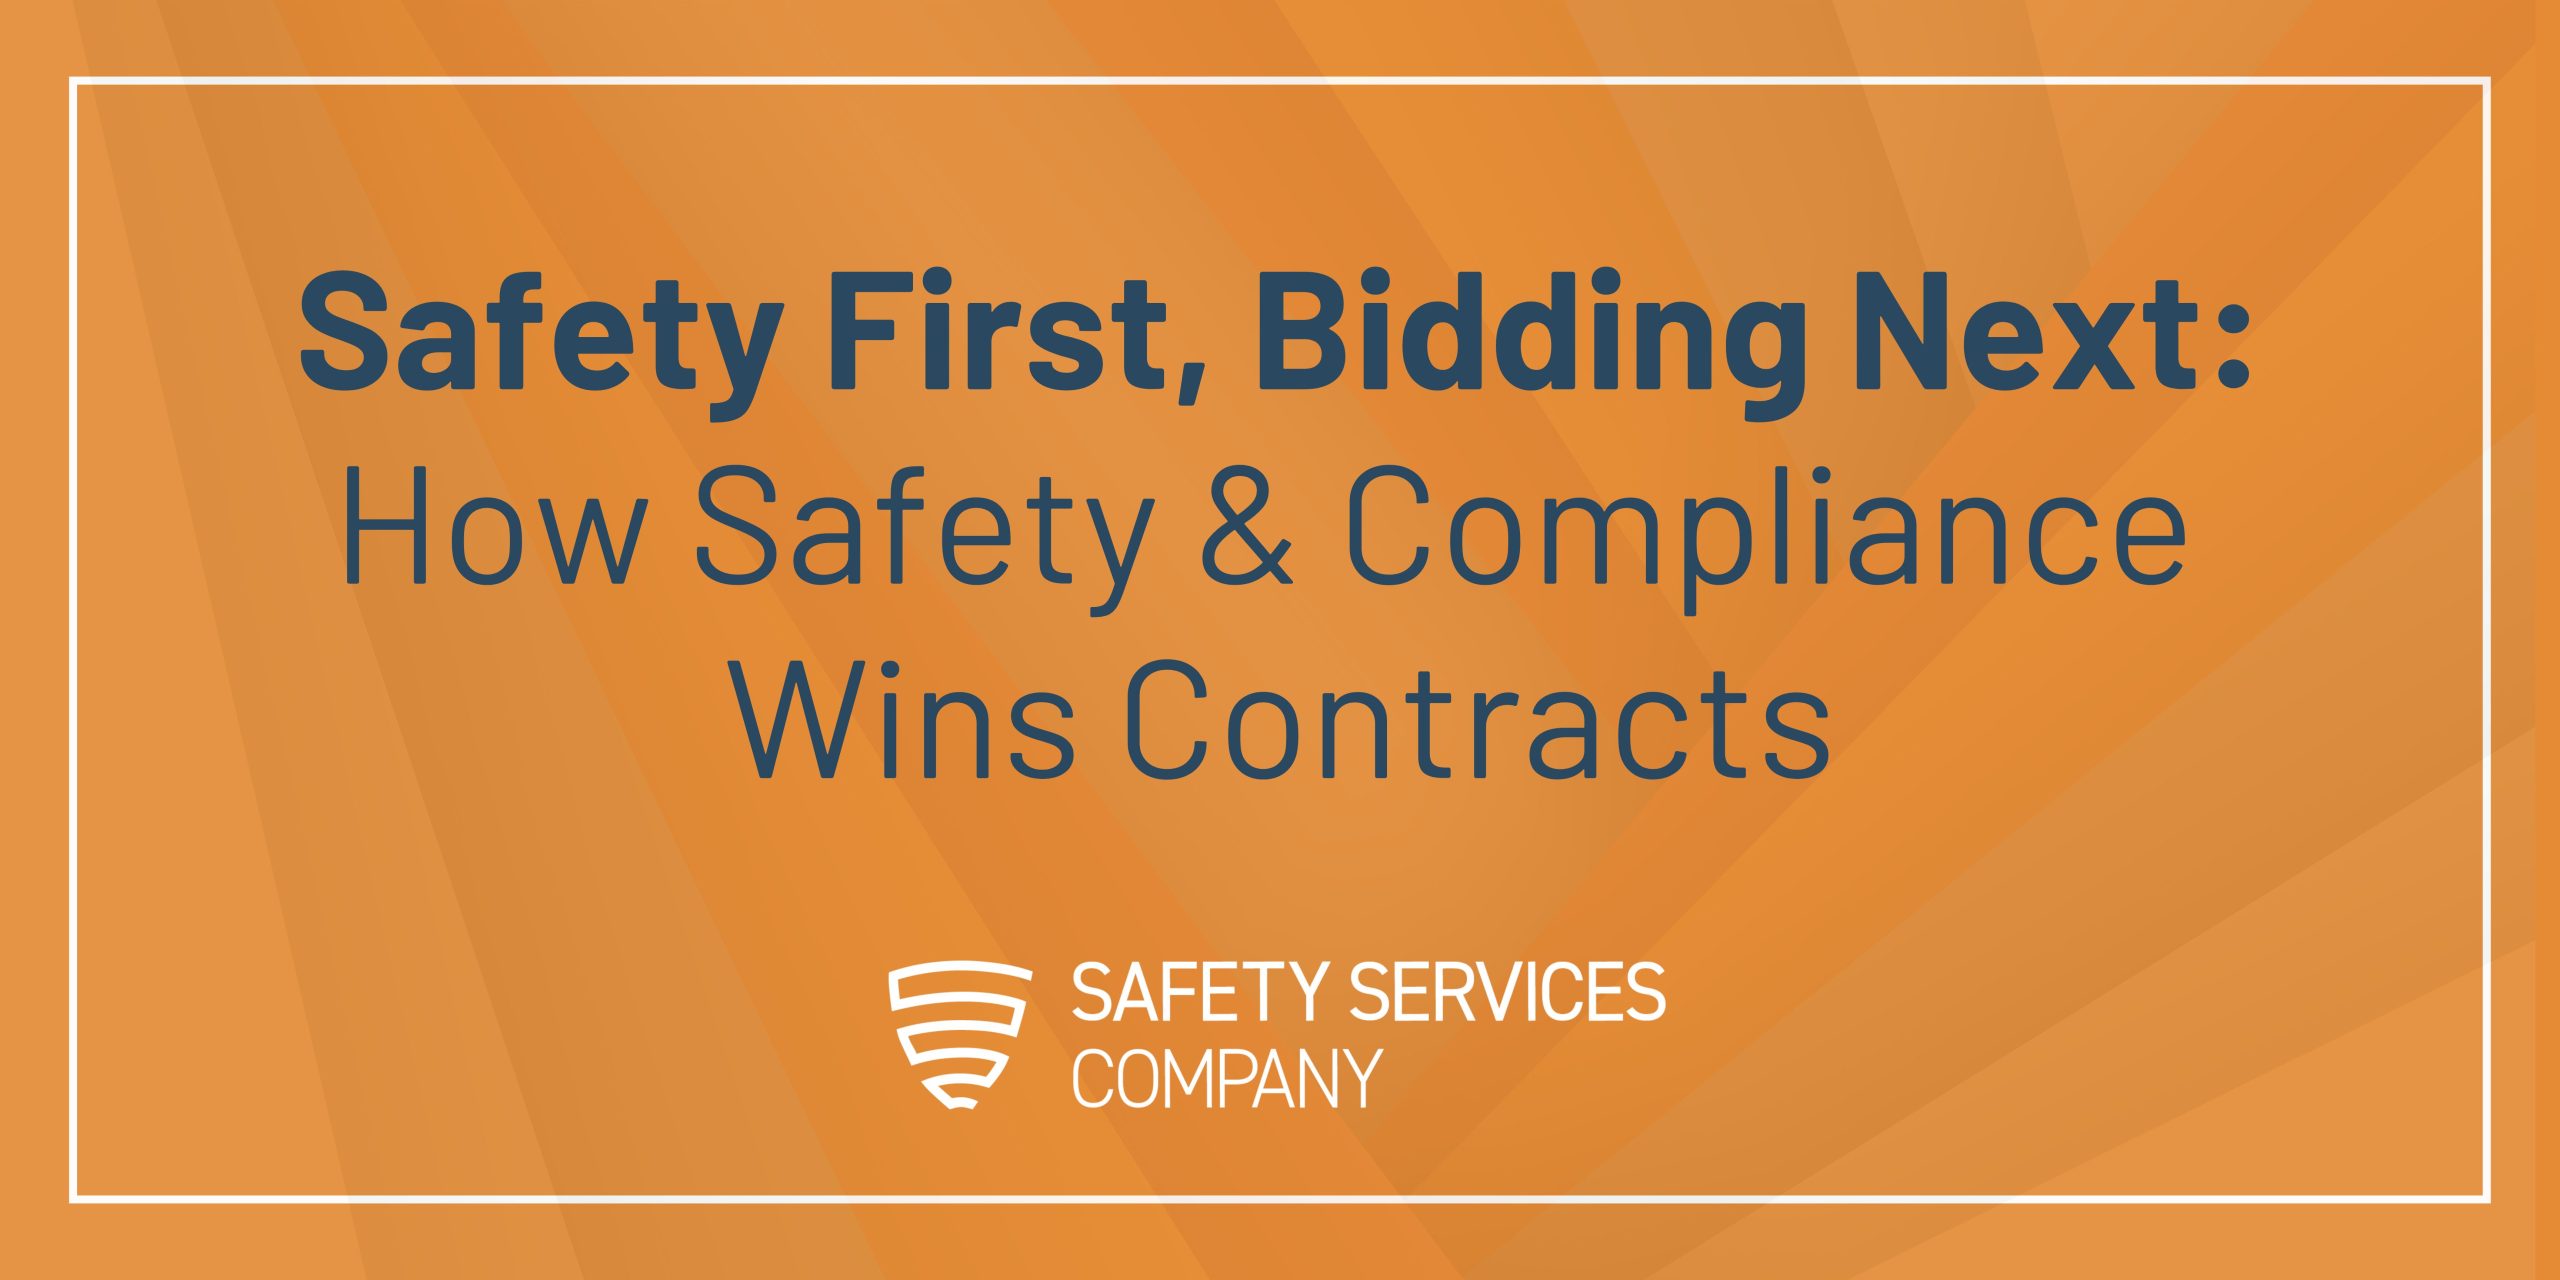 Safety First, Bidding Next: How Safety & Compliance Wins Contracts